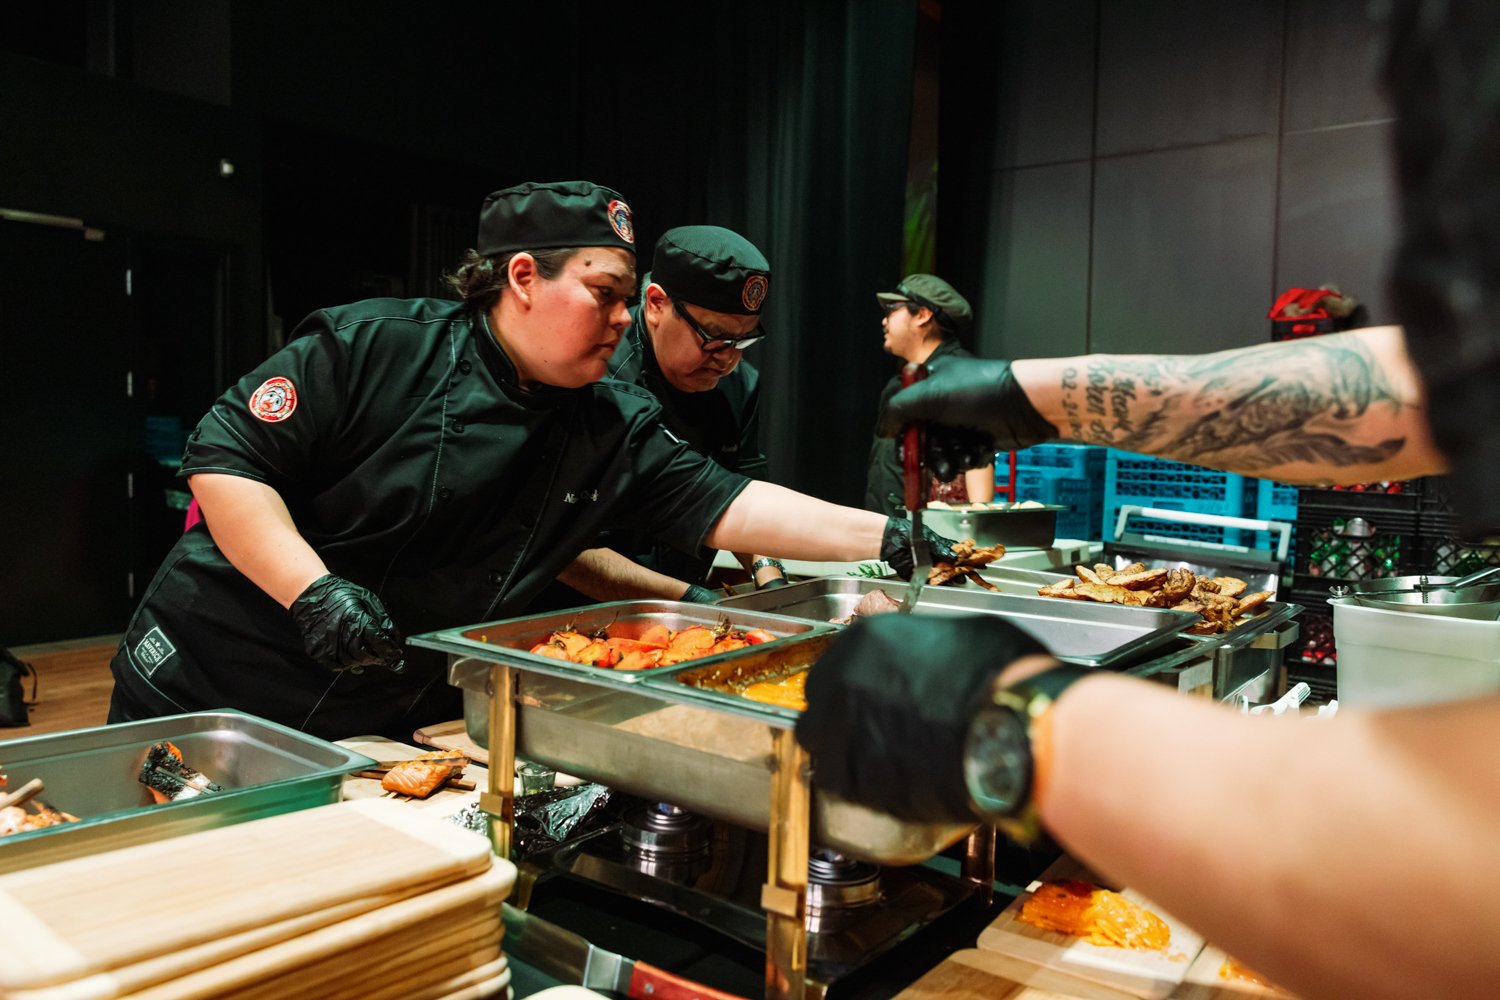  Chef Nola Mack and Chef Joseph Shawana are the epitome of calm in the midst of a busy kitchen as they plate dishes at the "Food for Good" event hosted by the Nature Conservancy and Nature United for COP15 in Tiohtià:ke (Montréal, Canada) entirely ma